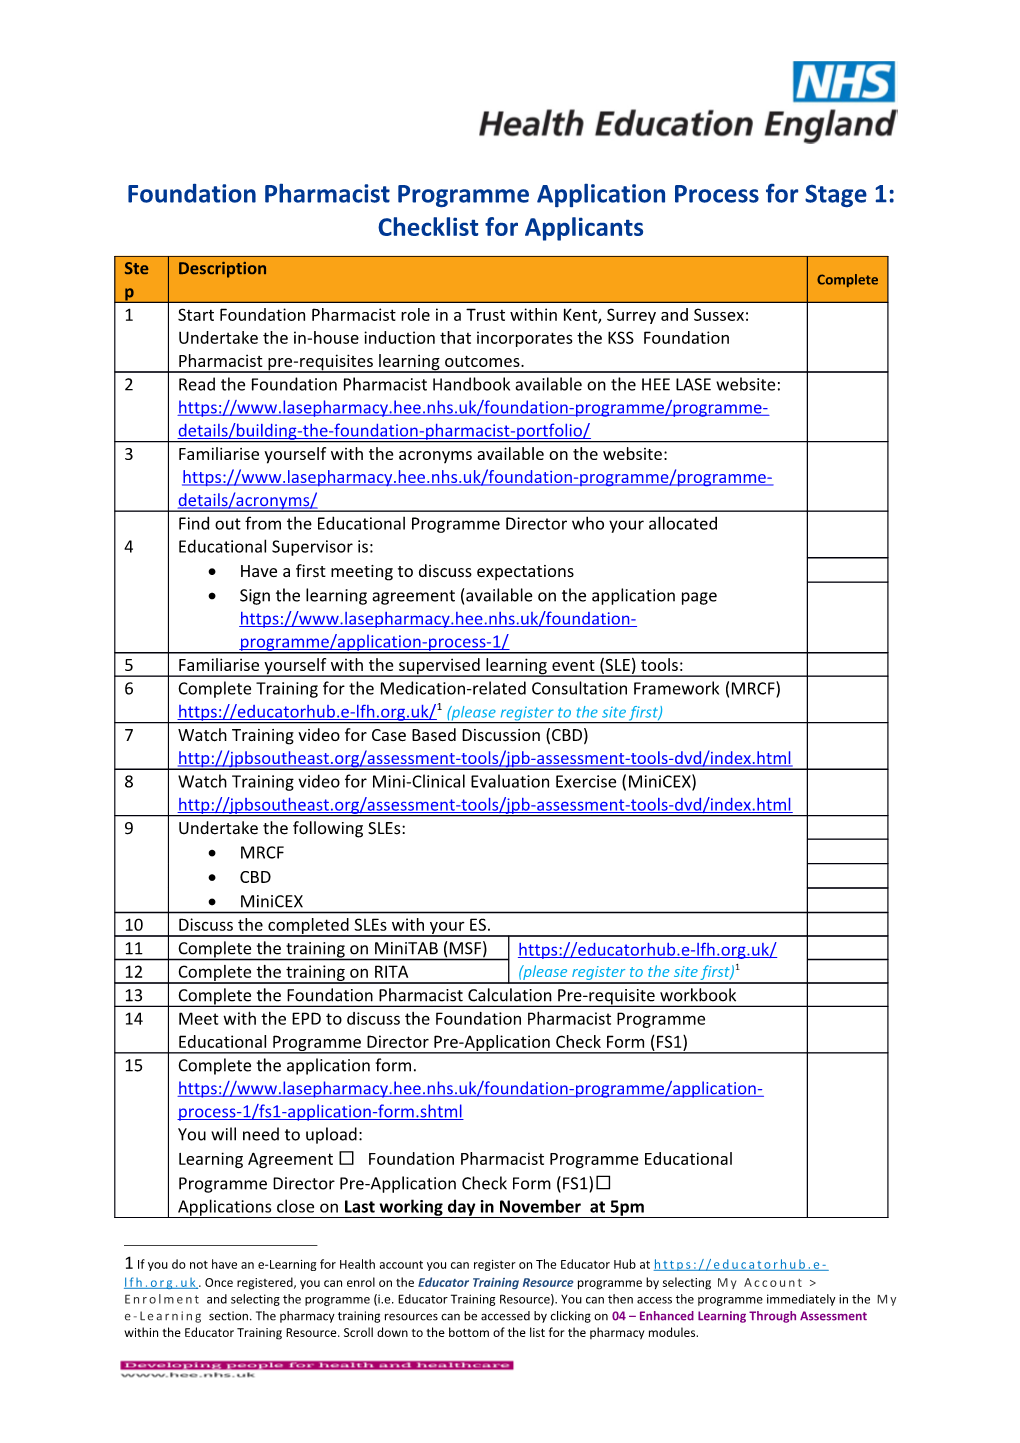 Foundation Pharmacist Programmeapplication Process for Stage 1: Checklist for Applicants